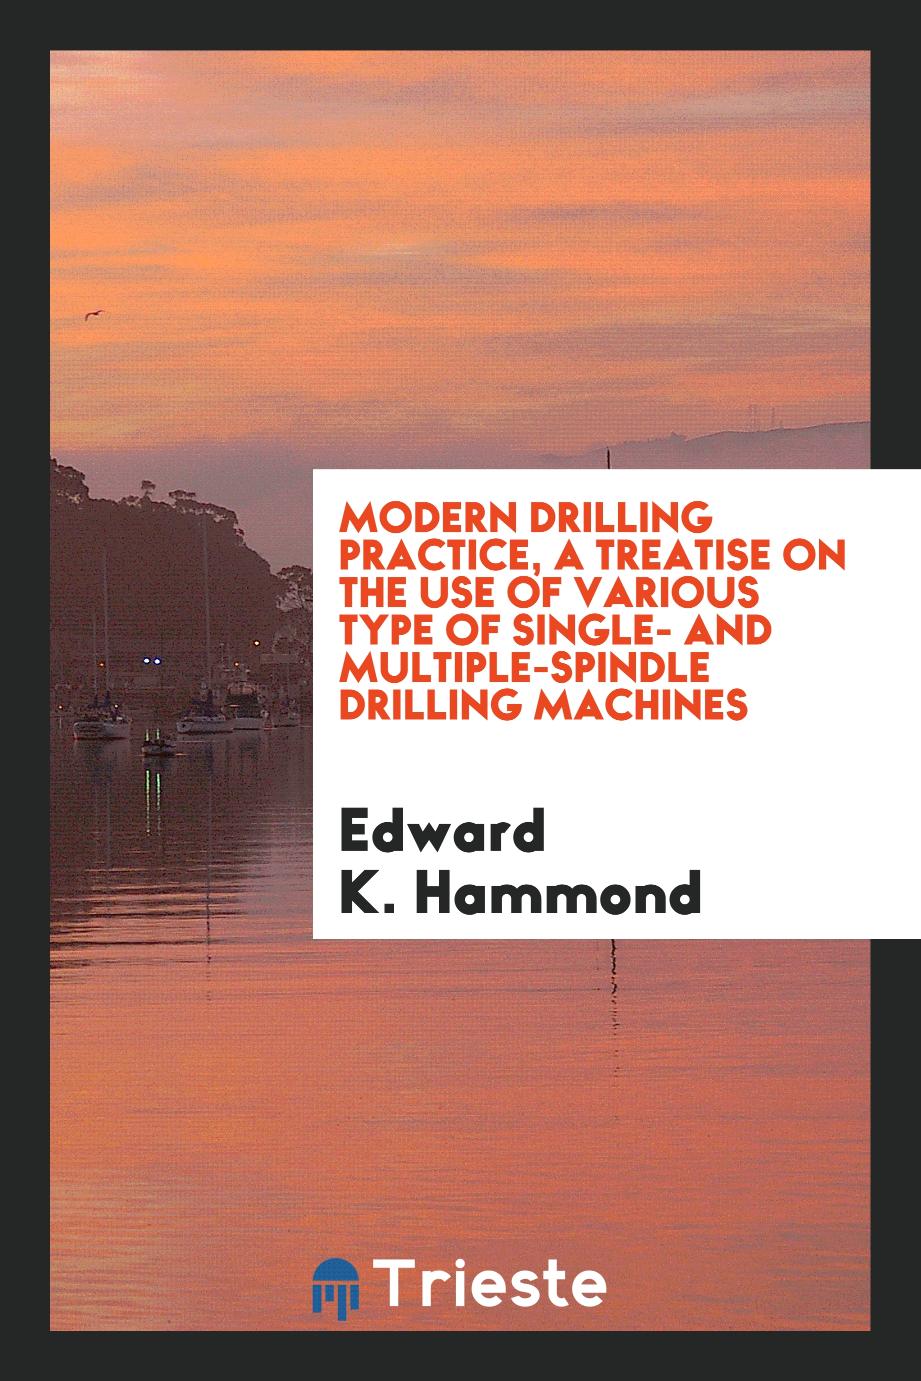 Modern drilling practice, a treatise on the use of various type of single- and multiple-spindle drilling machines